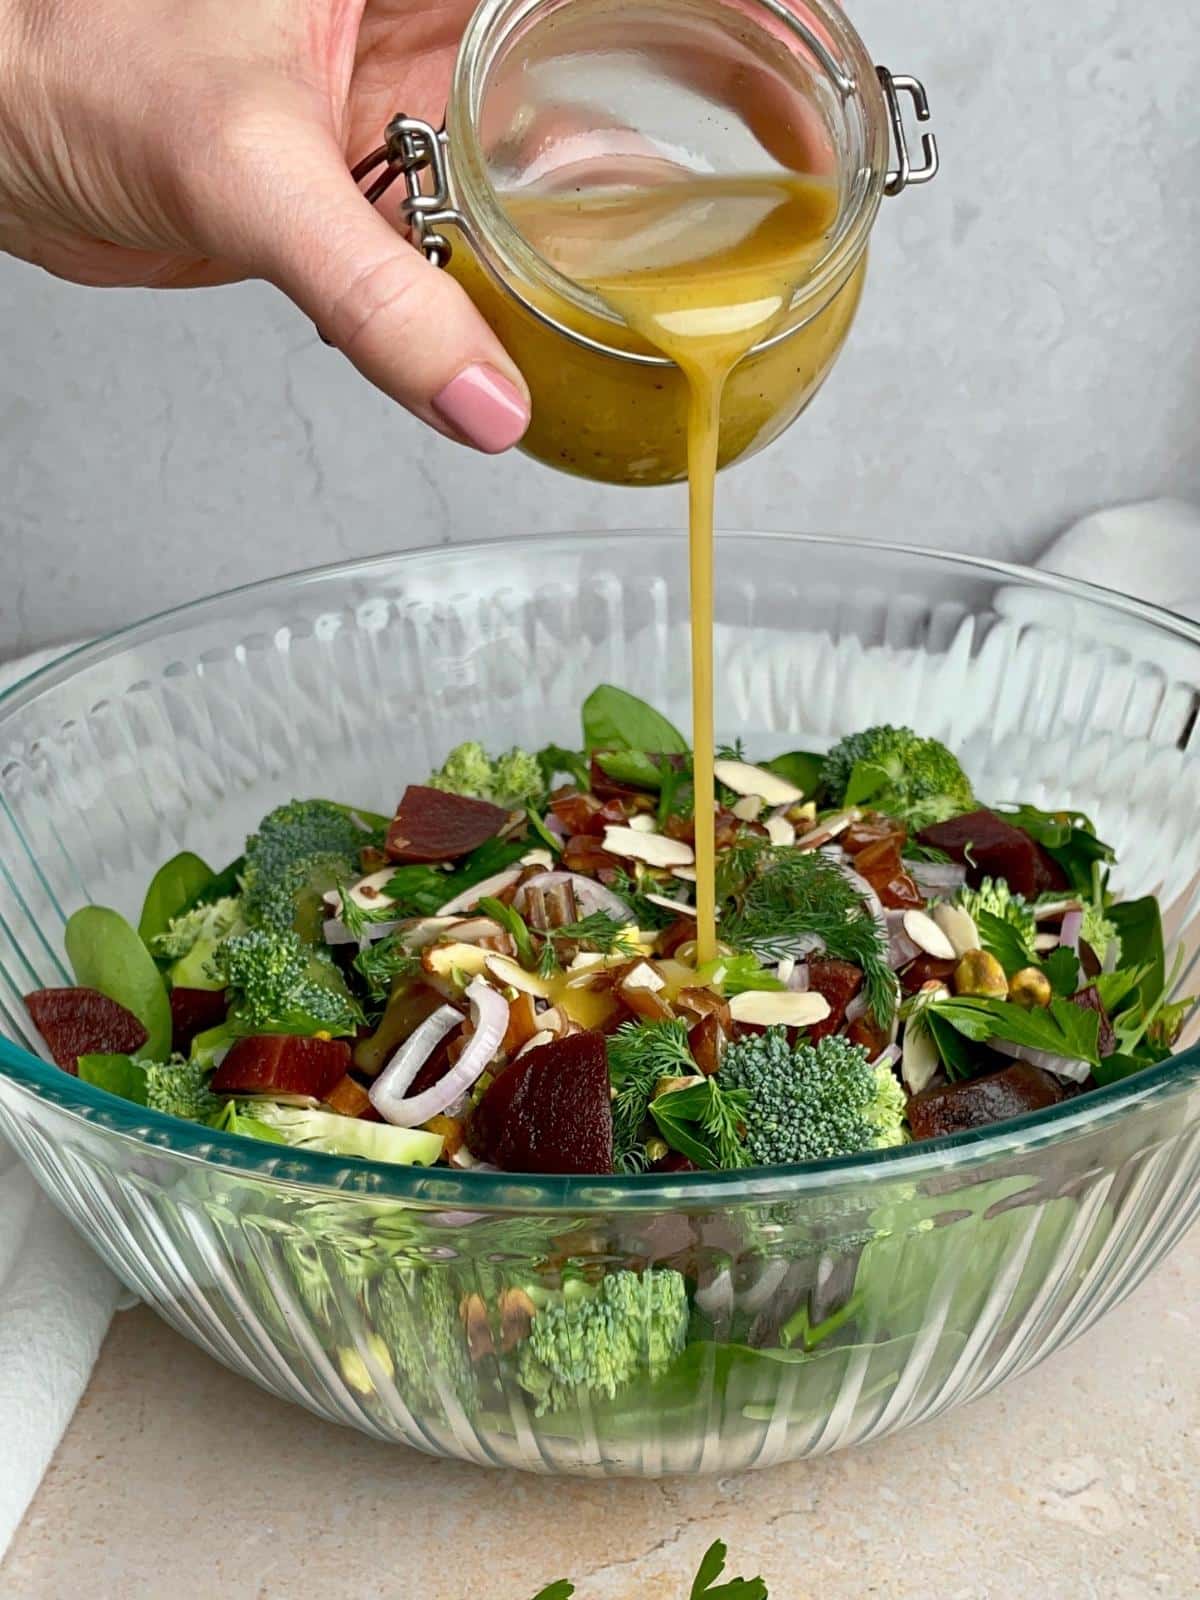 Pouring dressing over a salad.